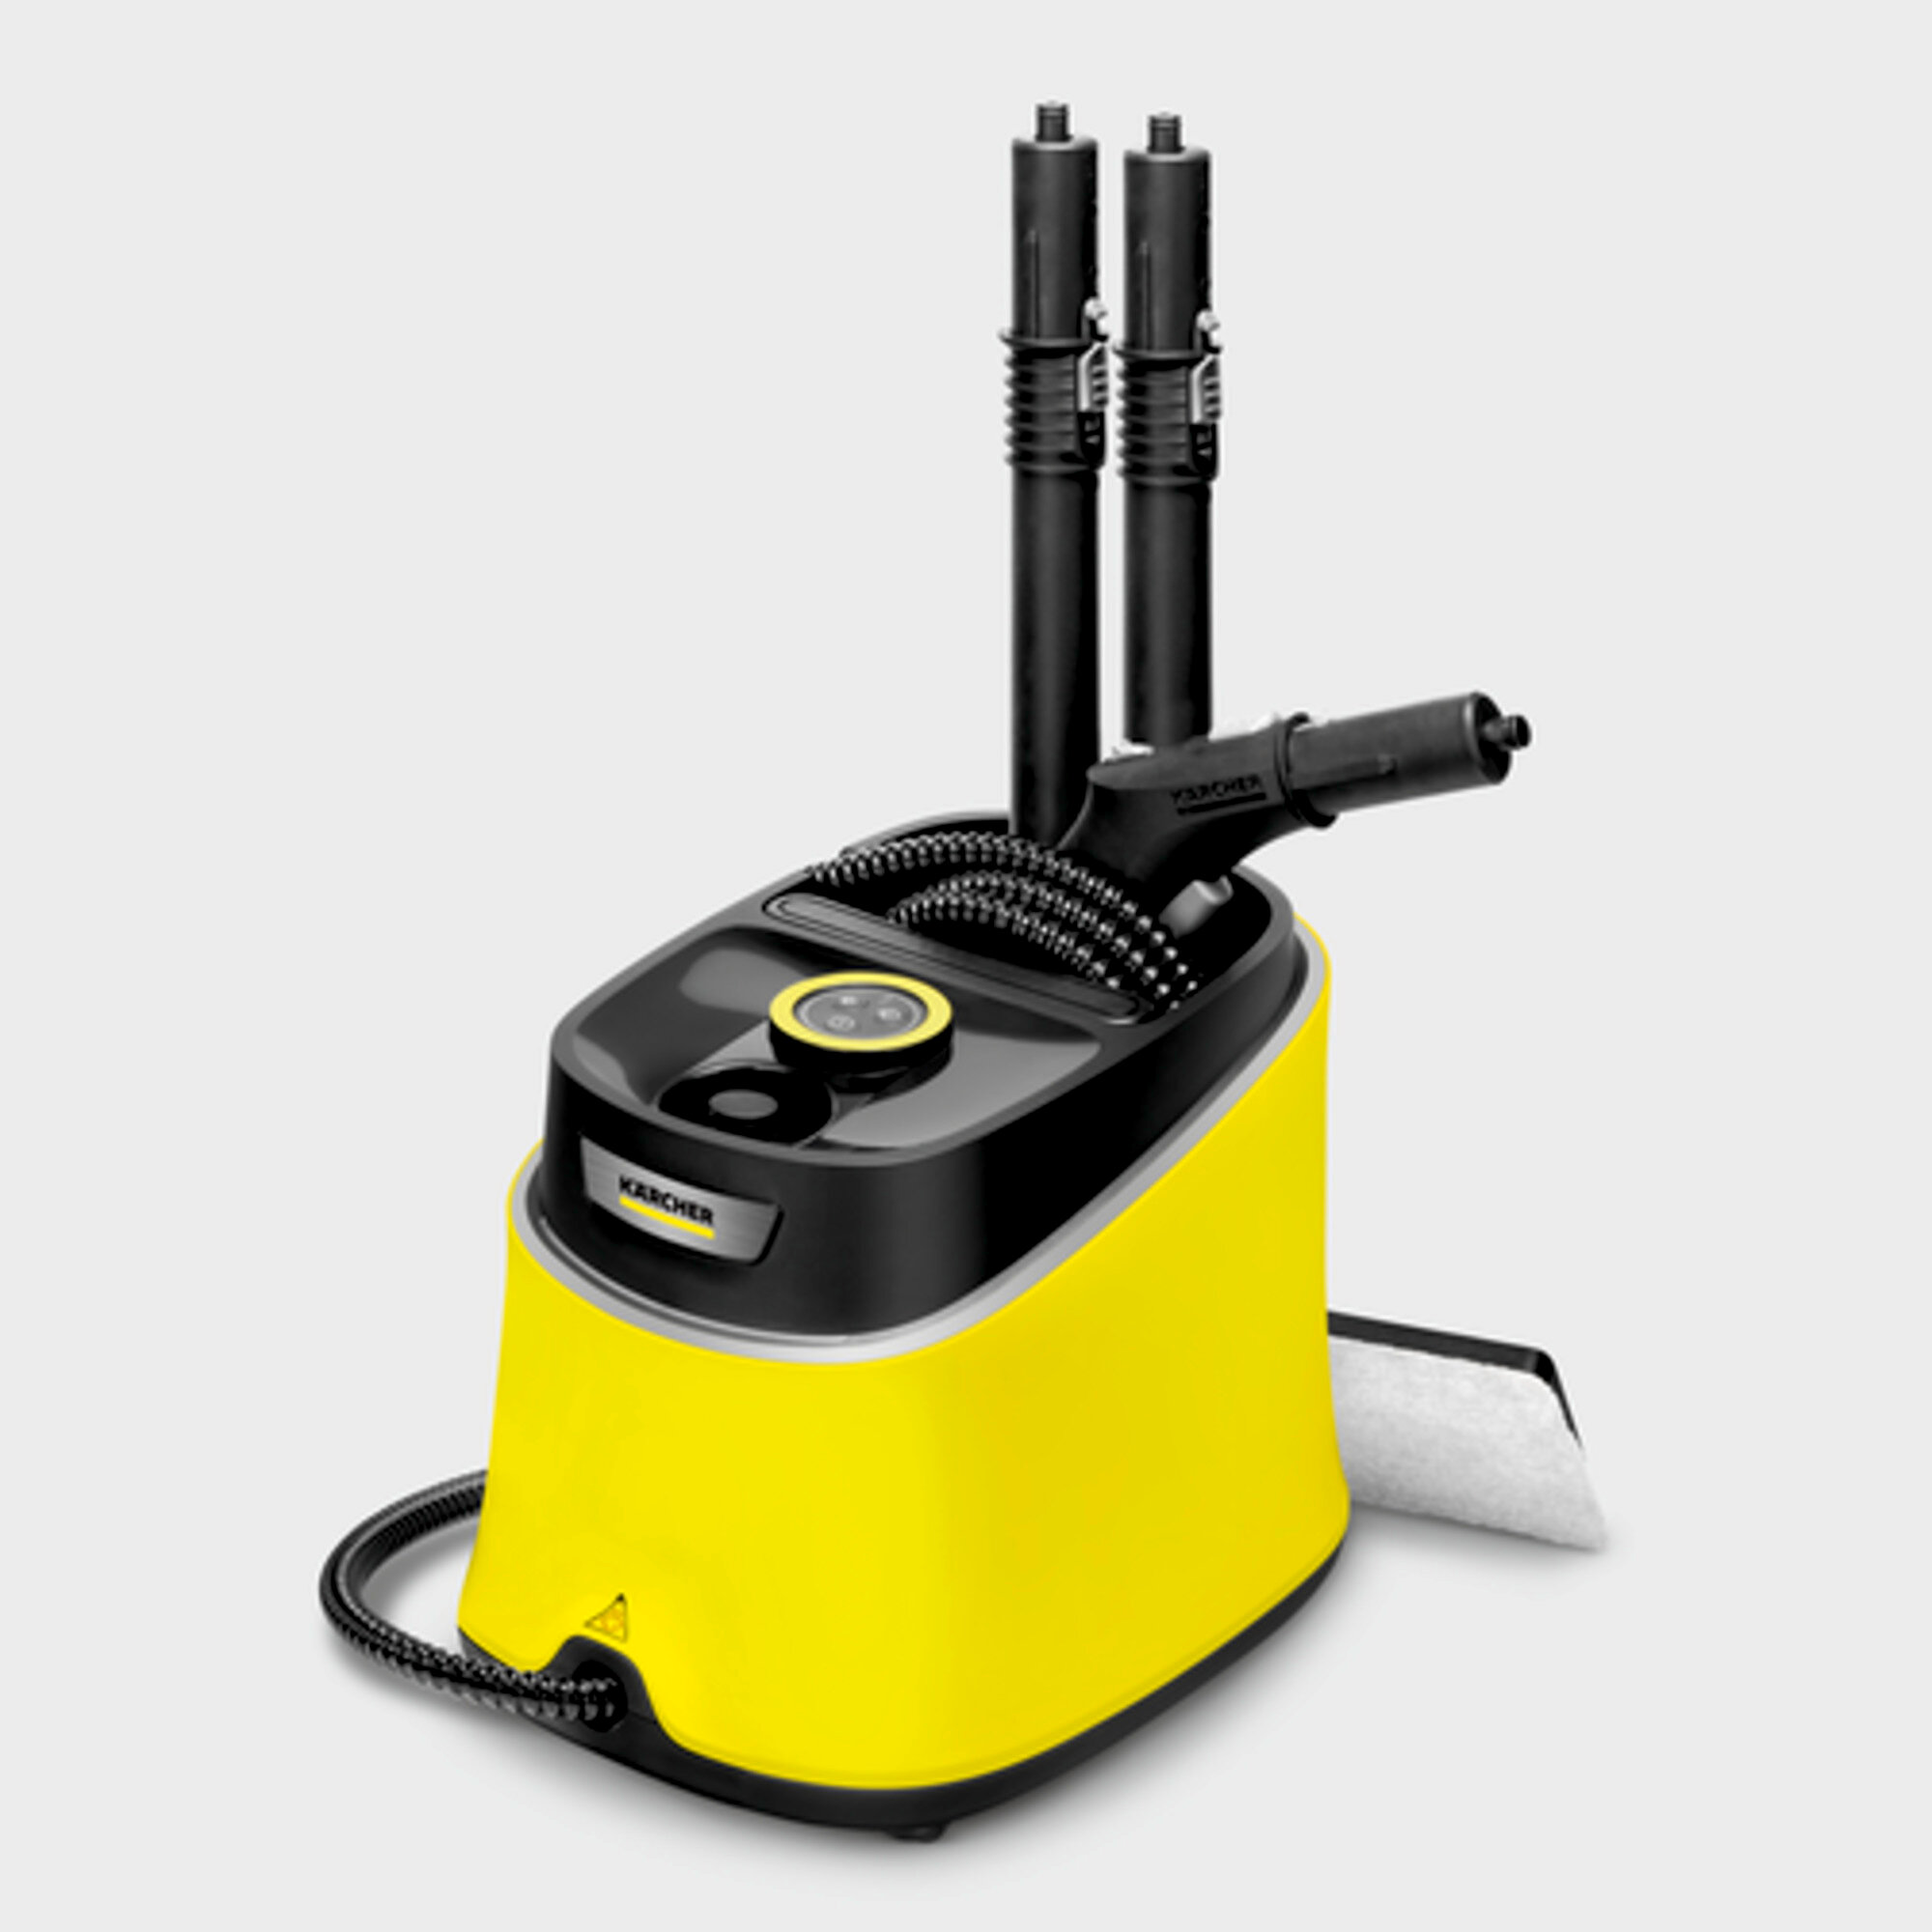 Steam cleaner SC 3 Deluxe EasyFix: Convenient accessory storage and parking position